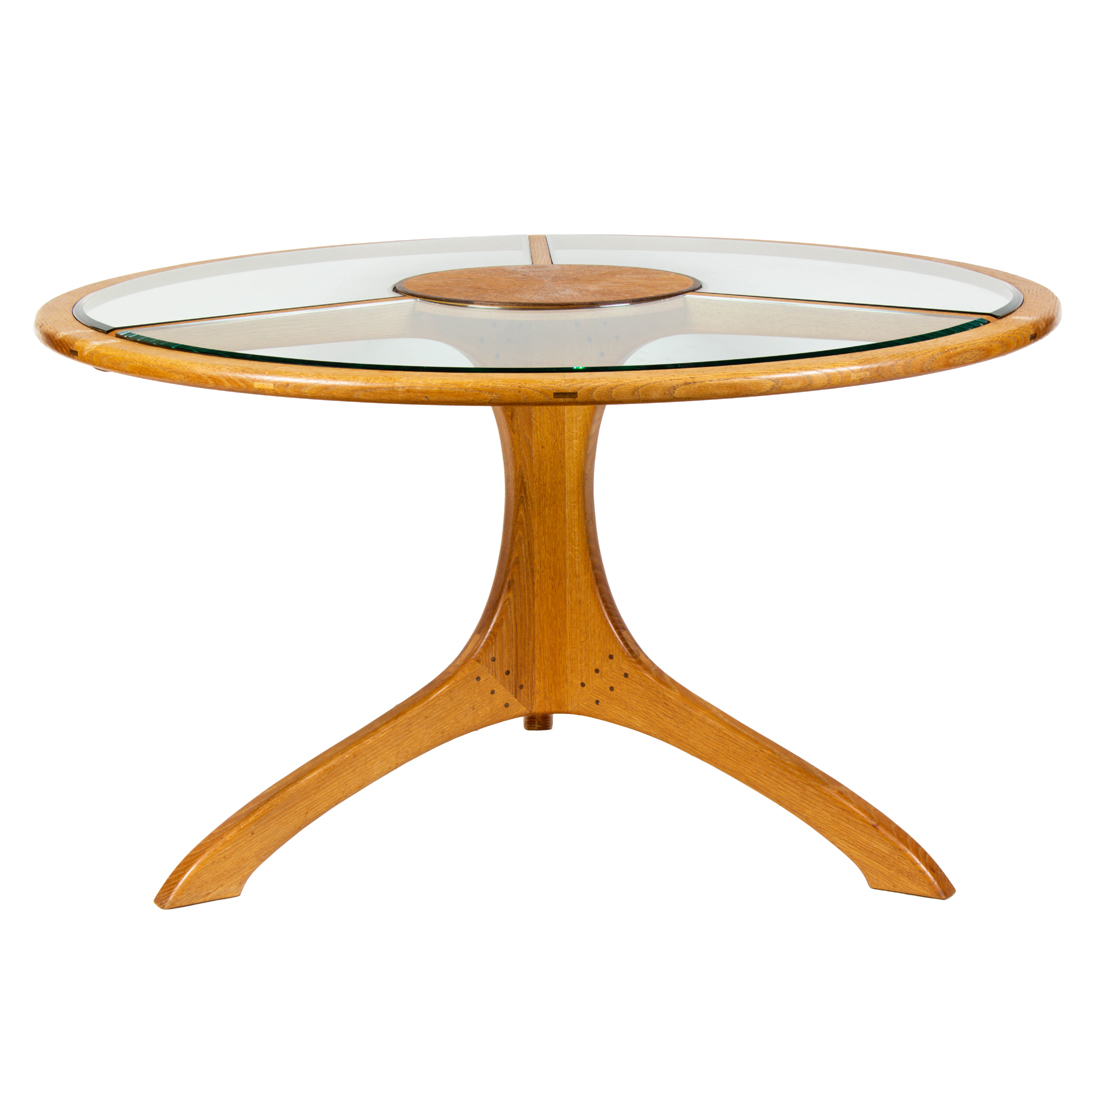 A MODERN OAK AND GLASS DINING TABLE 3a1765